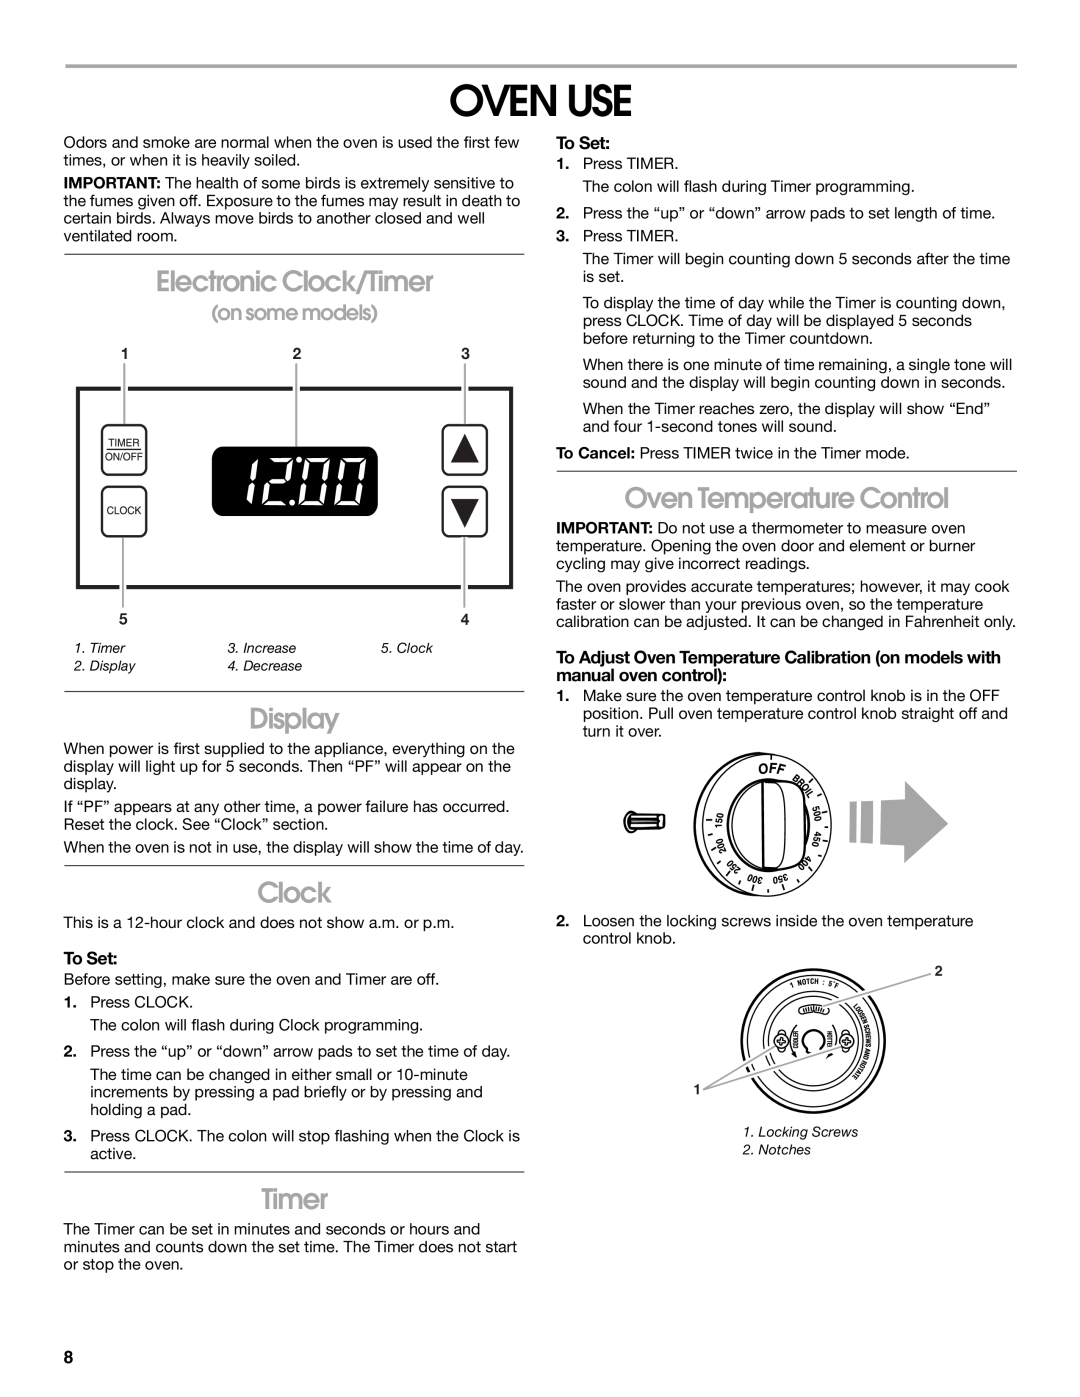 Whirlpool RME30000 manual Oven Use, Electronic Clock/Timer, Display, Oven Temperature Control, To Set, on some models 